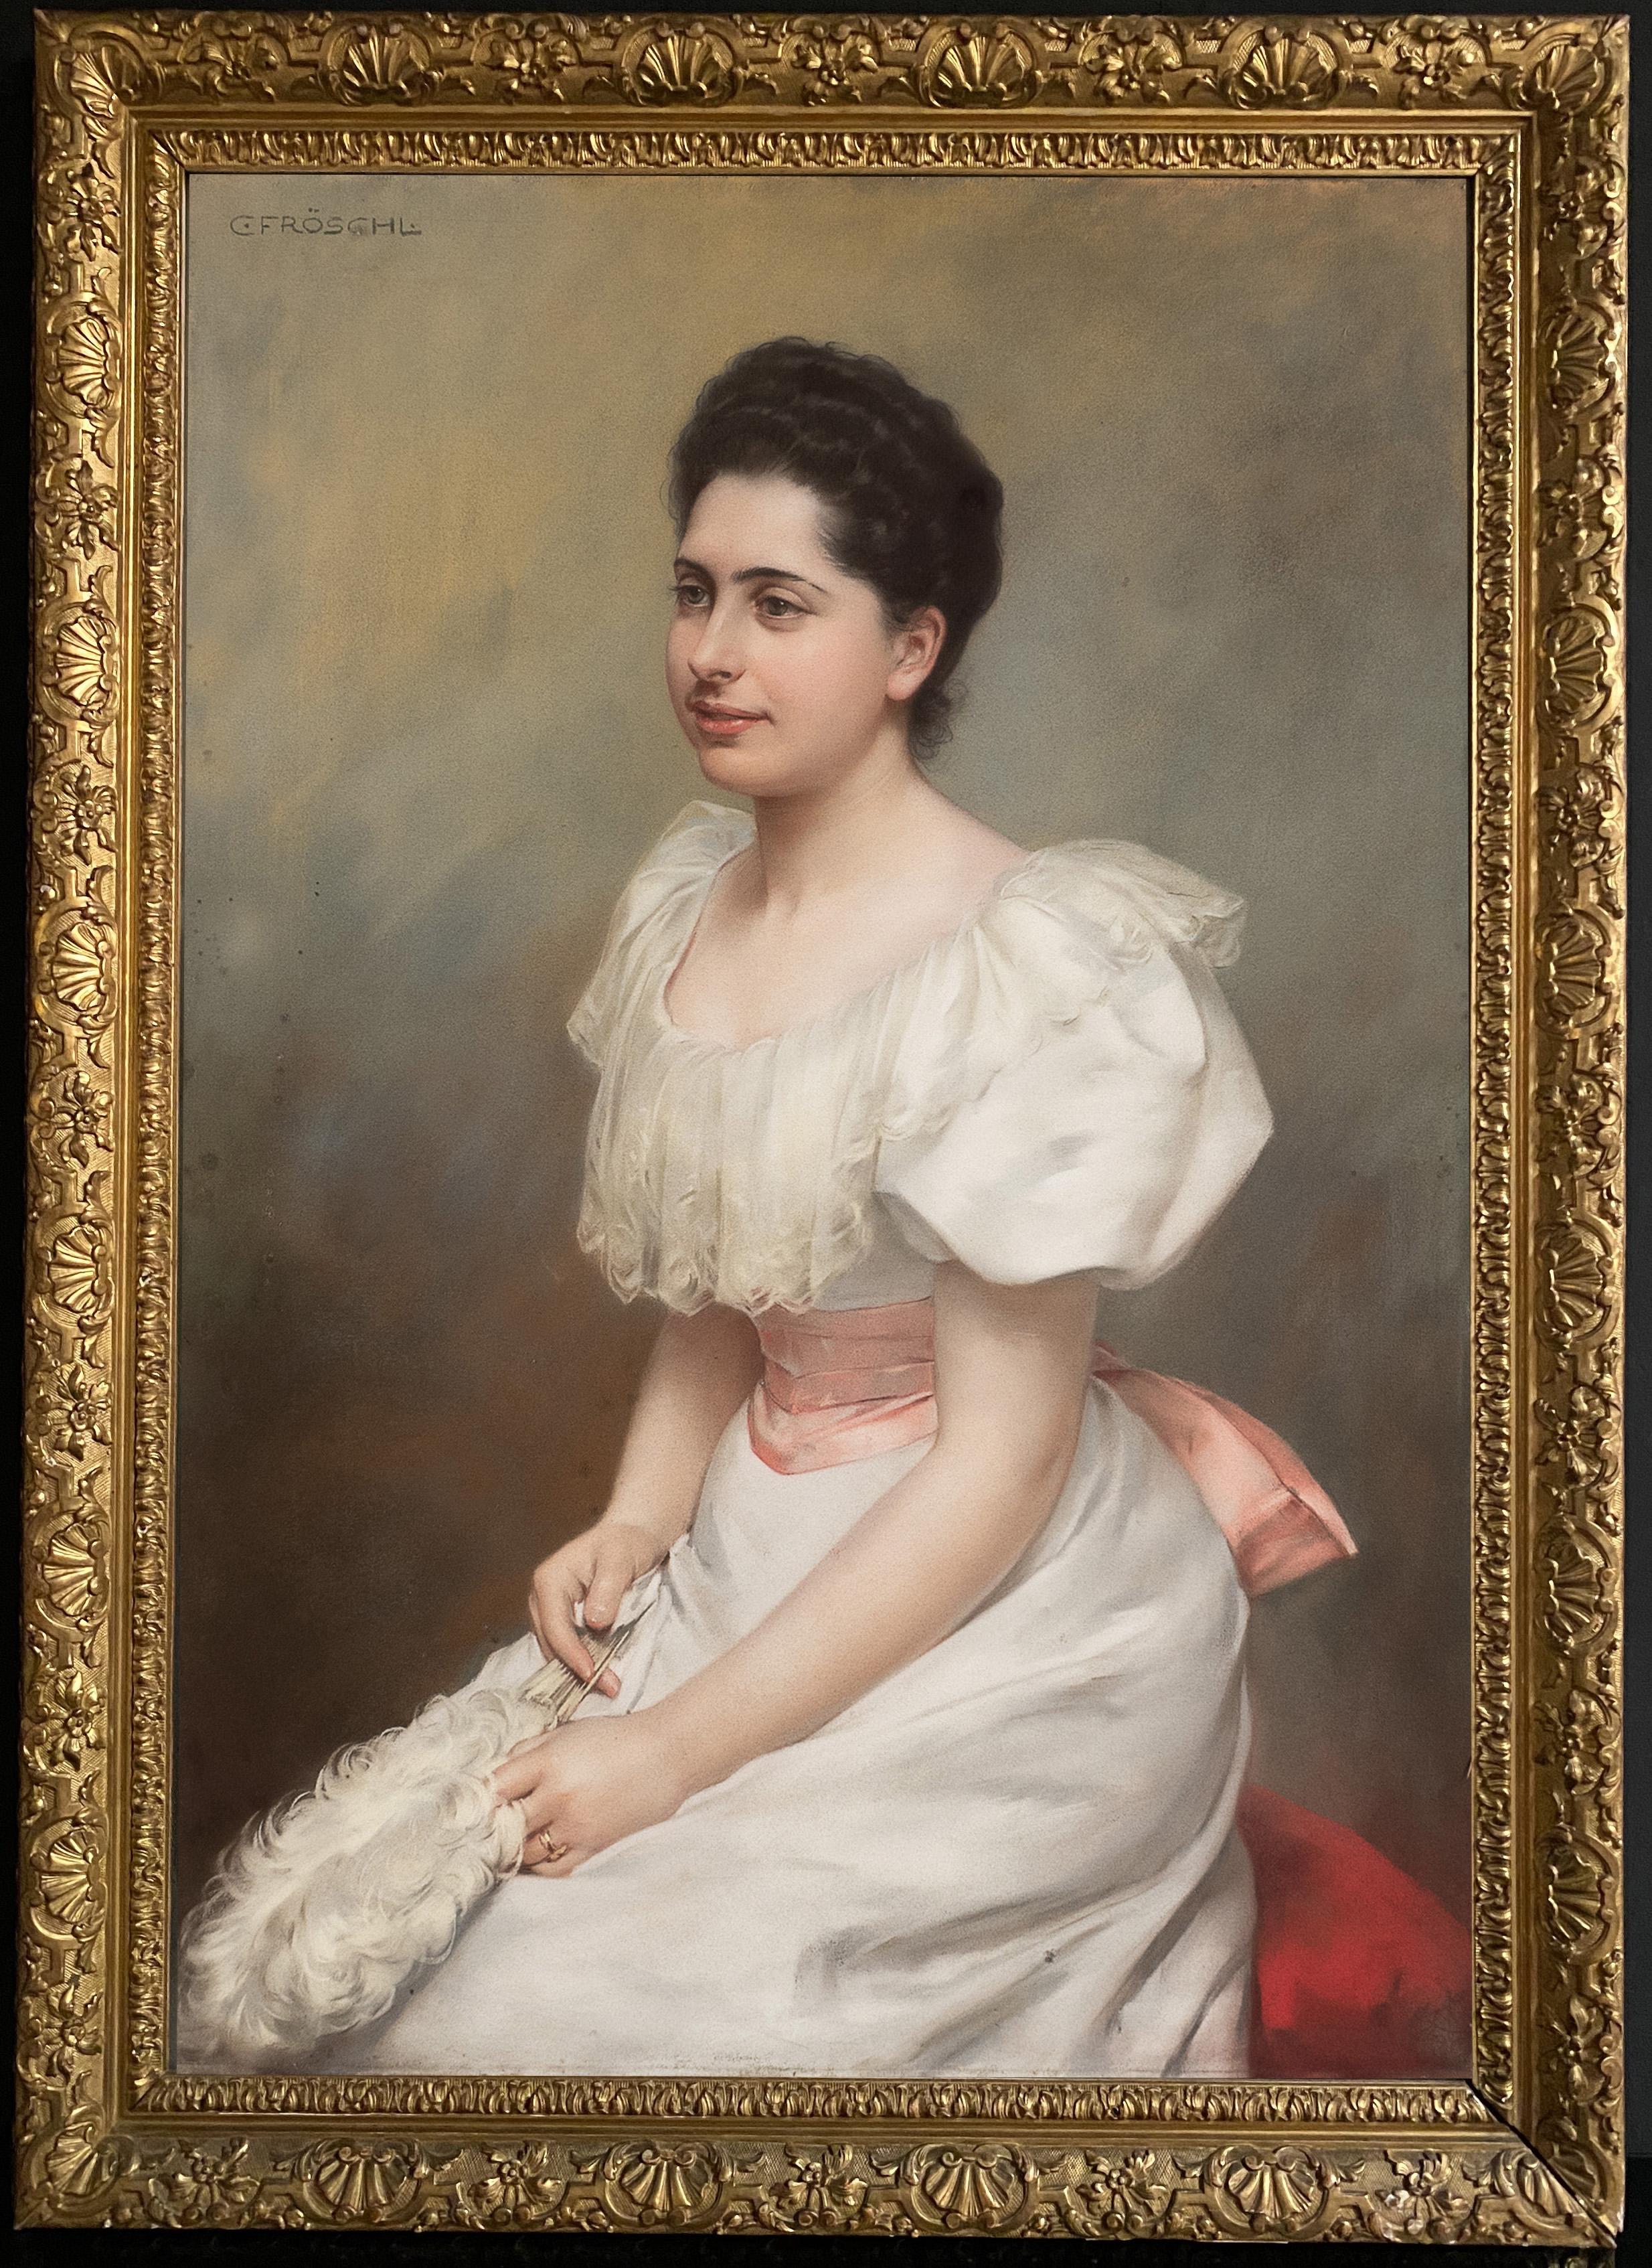 Carl Froschl Portrait Painting - Graceful Portrait of the Countess Carrobio Pastel on Canvas 1910 circa 